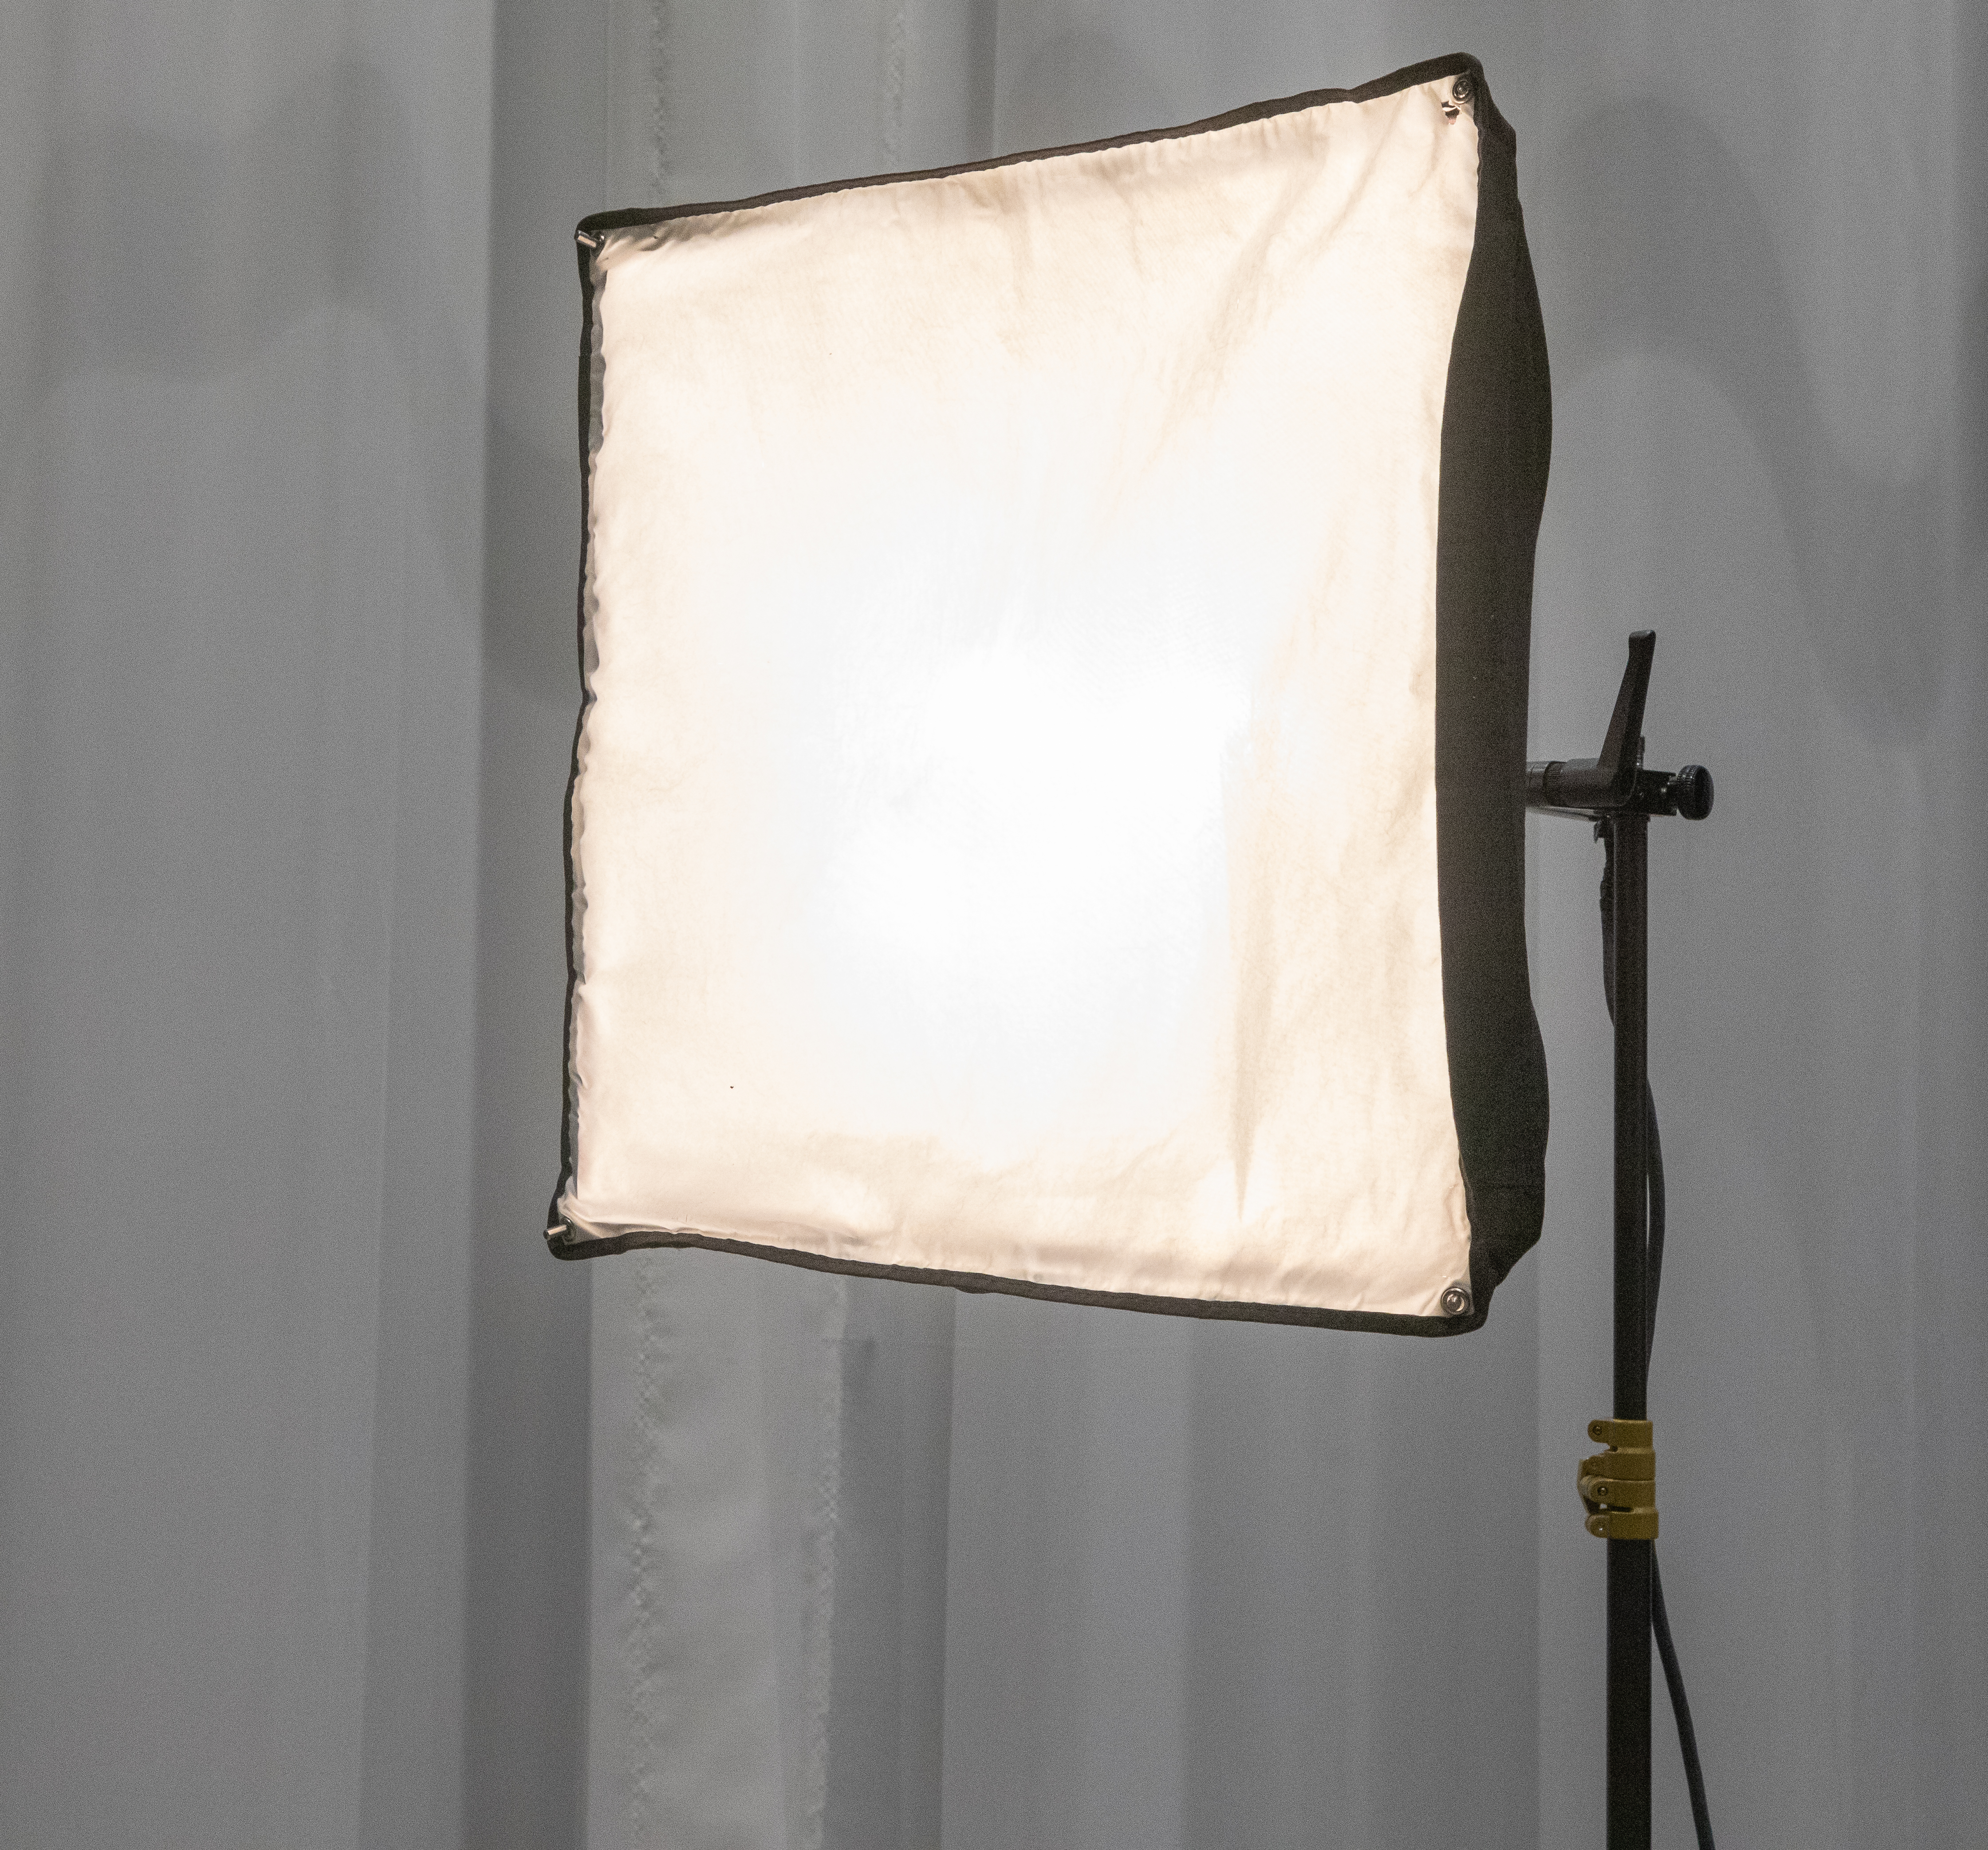 Image of a light with soft box with diffusion cover on.